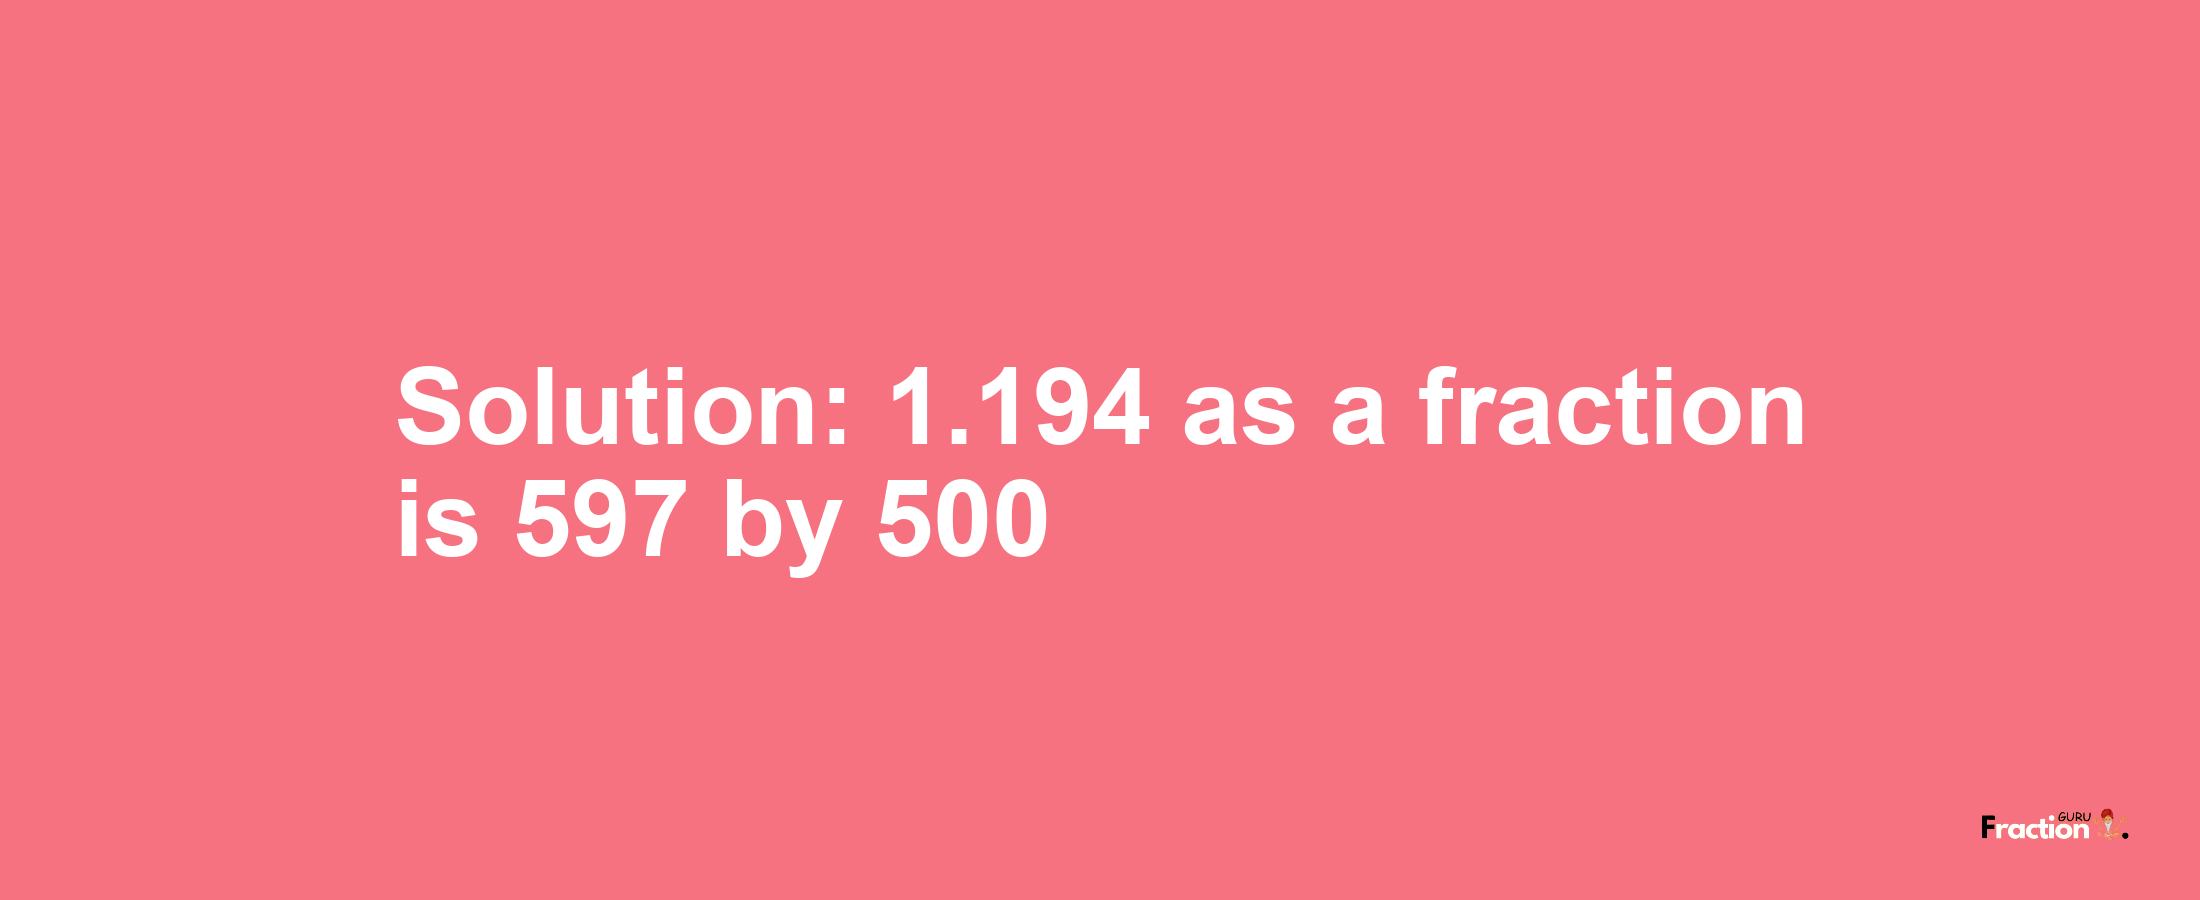 Solution:1.194 as a fraction is 597/500